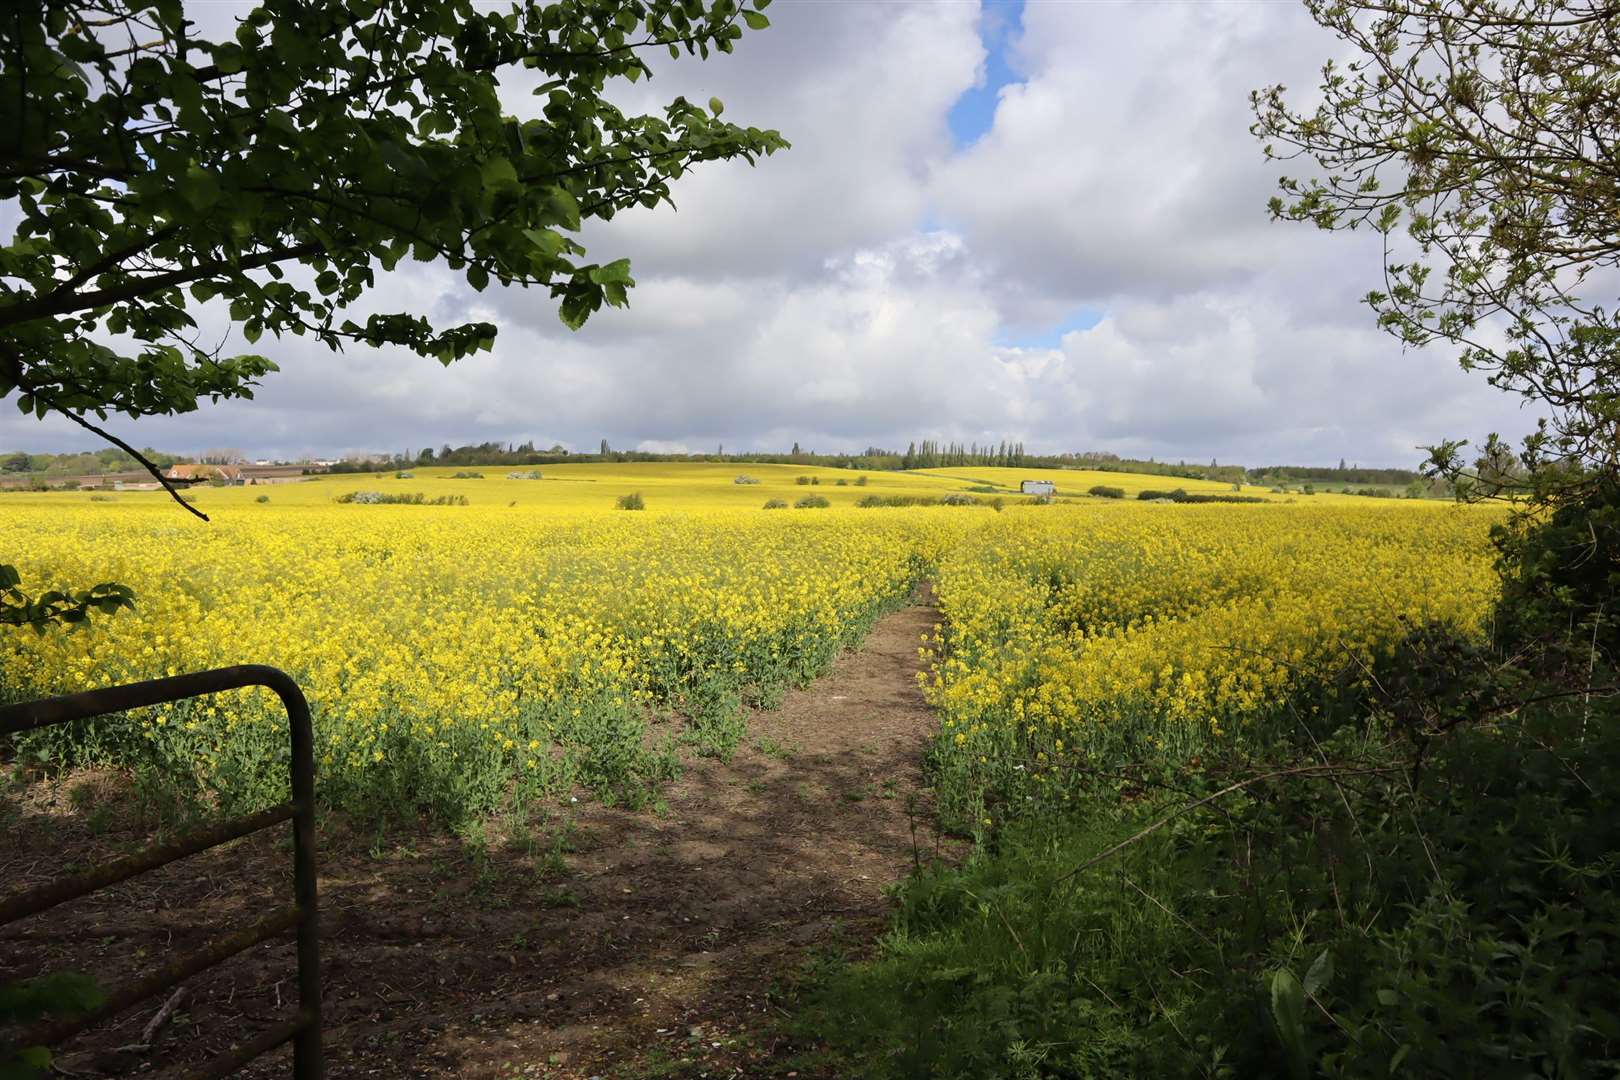 Rape seed at Eastchurch on the sun-kissed Isle of Sheppey today (Friday) before the storm clouds arrived. Picture: John Nurden